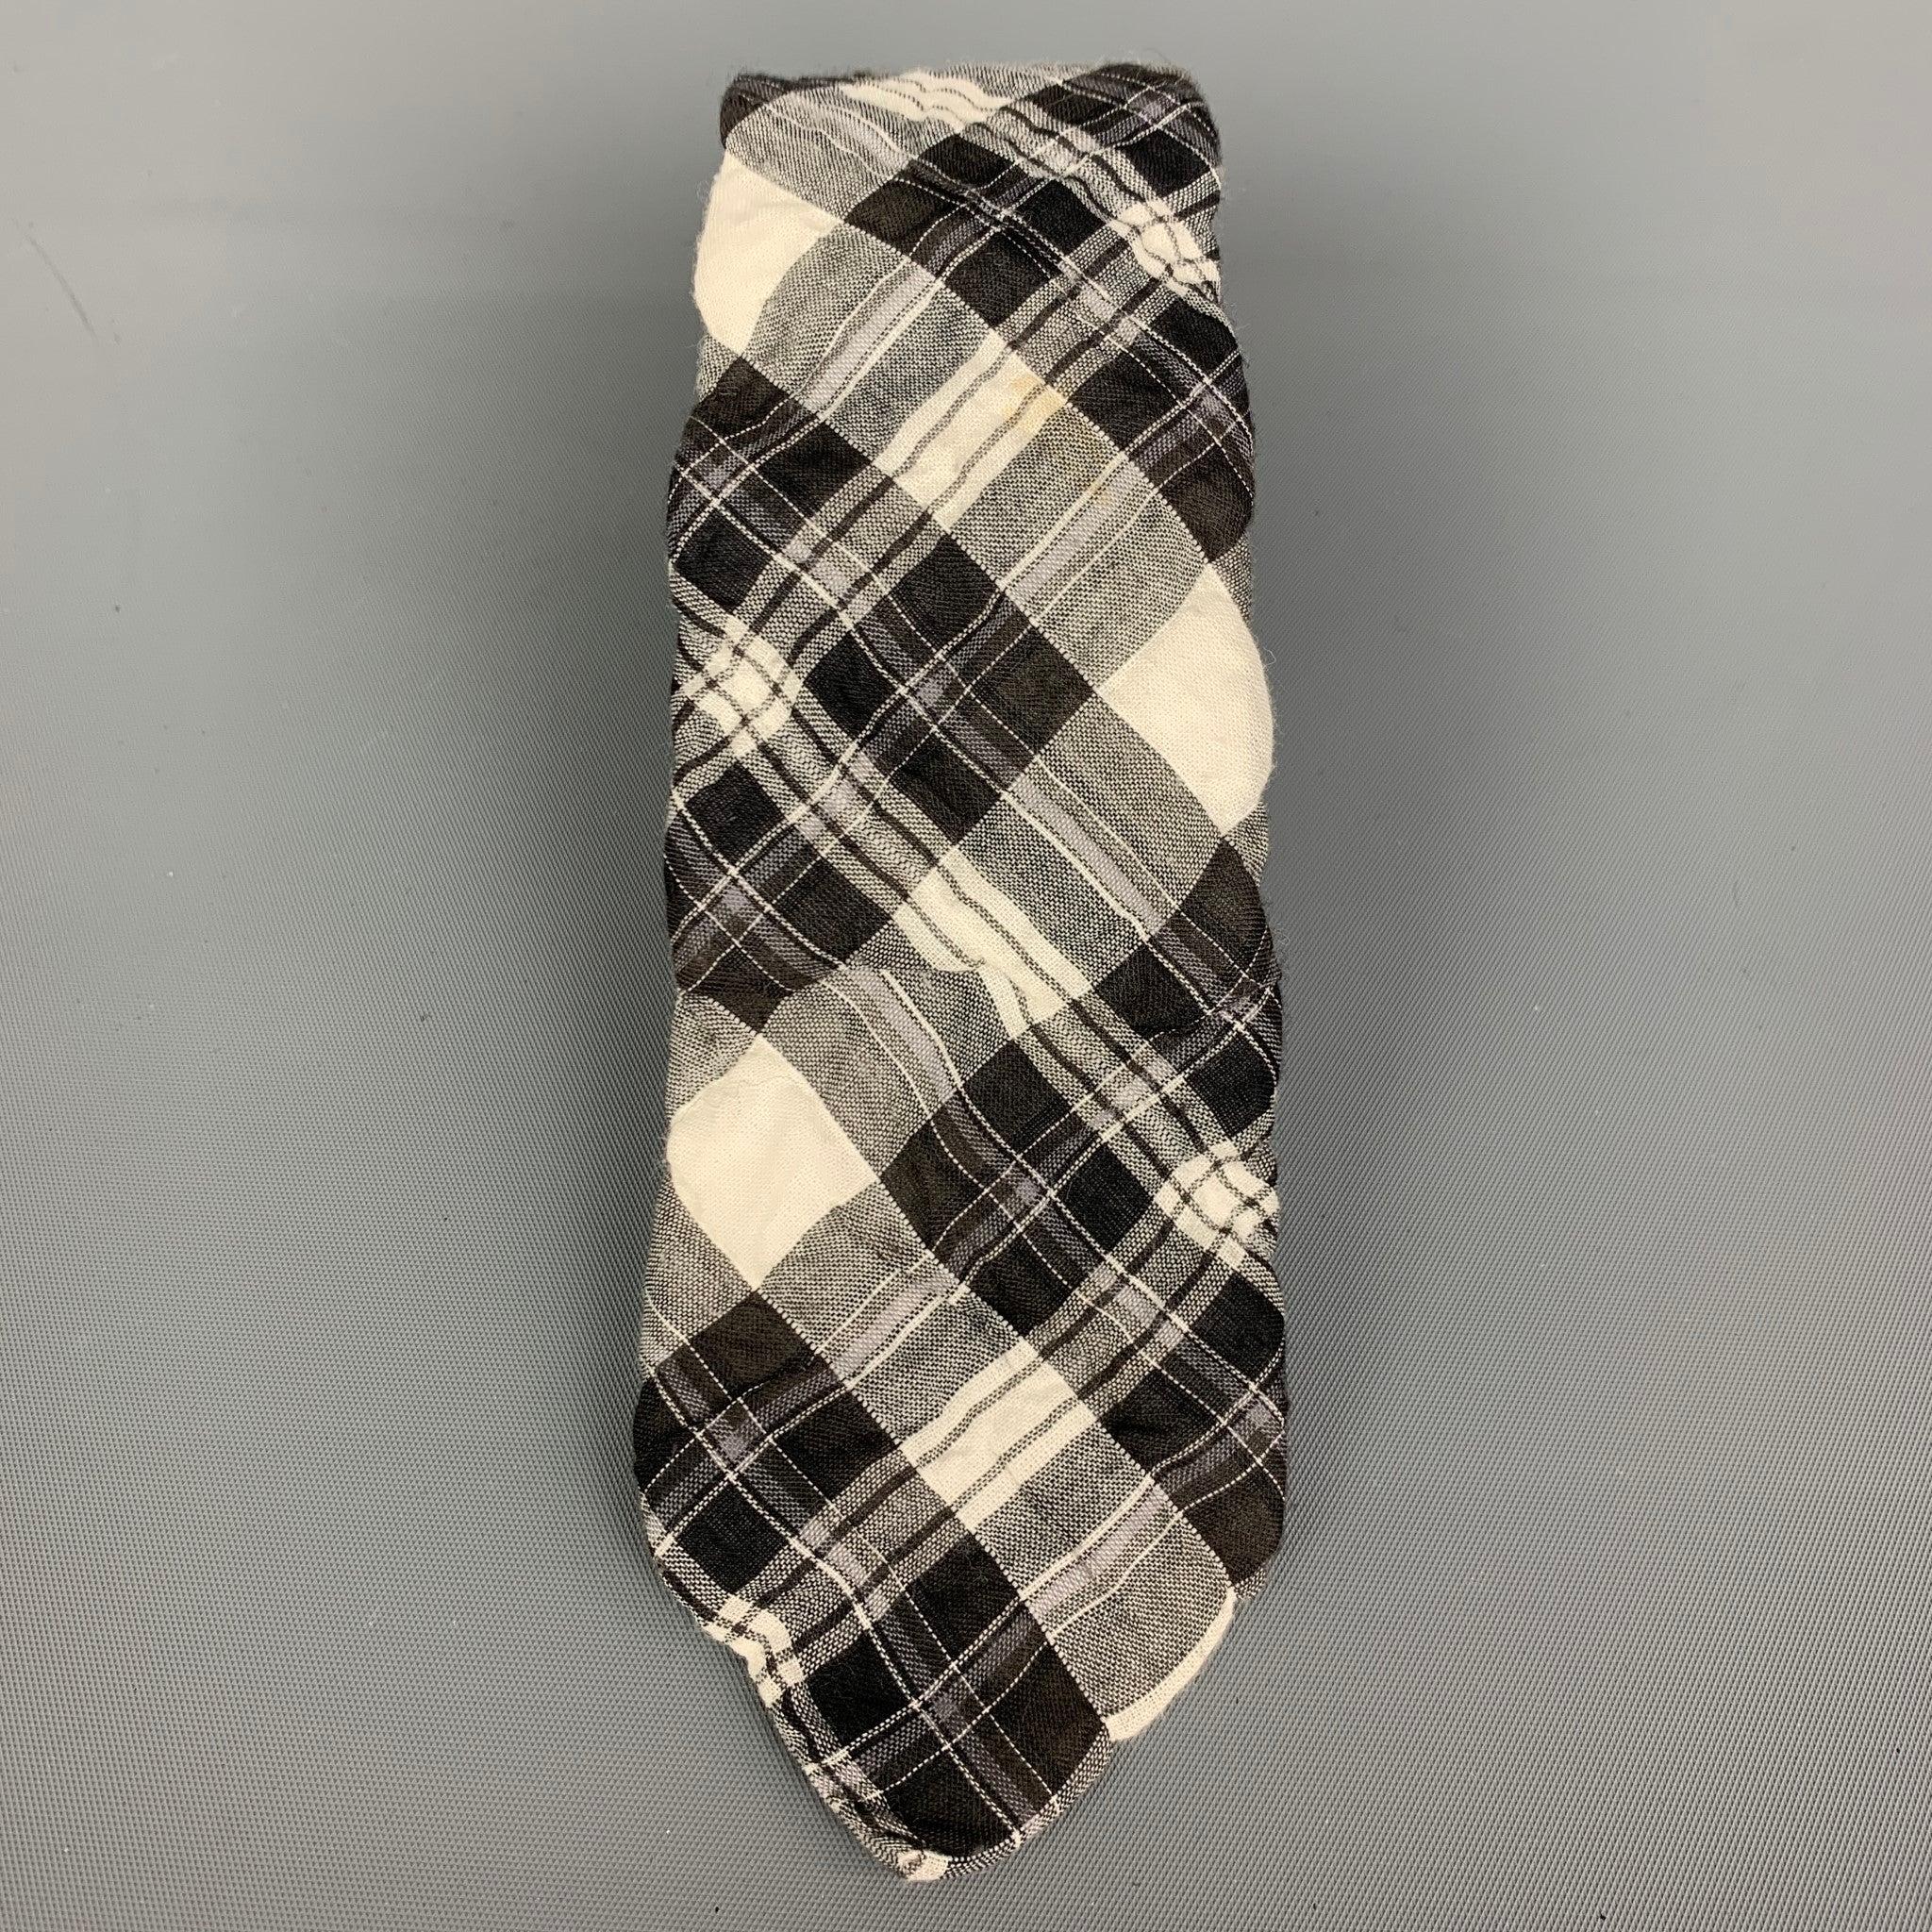 JOHN VARVATOS necktie comes in black and white plaid wool blend material. Made in Italy.Very Good Pre-Owned Condition. Minor sign of wear.Width: 2. 5 inches Length: 62 inches 
  
  
 
Reference: 60546
Category: Tie
More Details
    
Brand:  JOHN